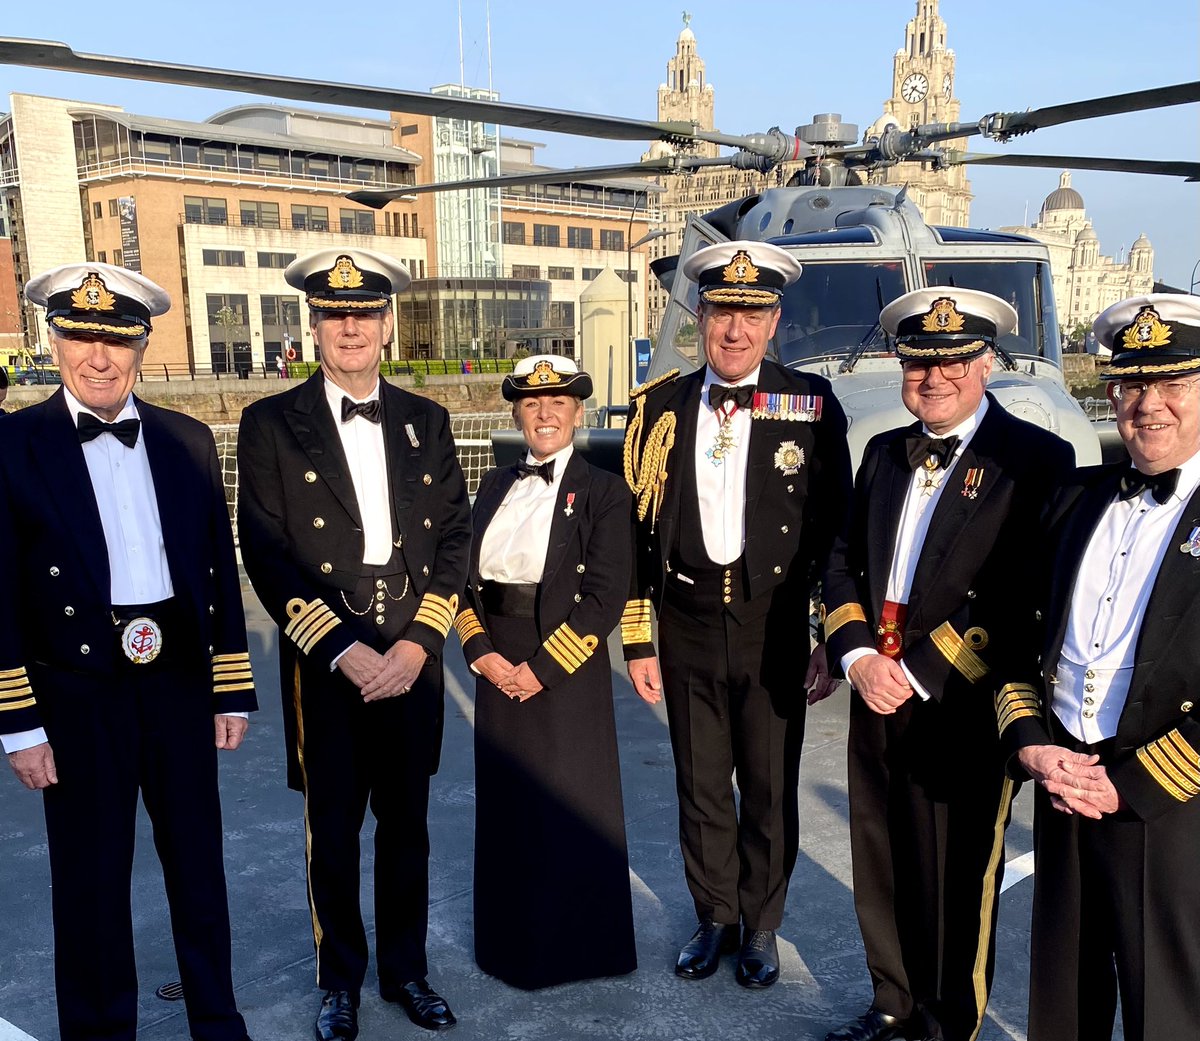 Thank you to @HMSDefender for helping mark the 80th anniversary of the Battle of the Atlantic. Poignant commemorations in Liverpool this weekend #BoA80 @FirstSeaLord @RoyalNavy @MartinJConnell